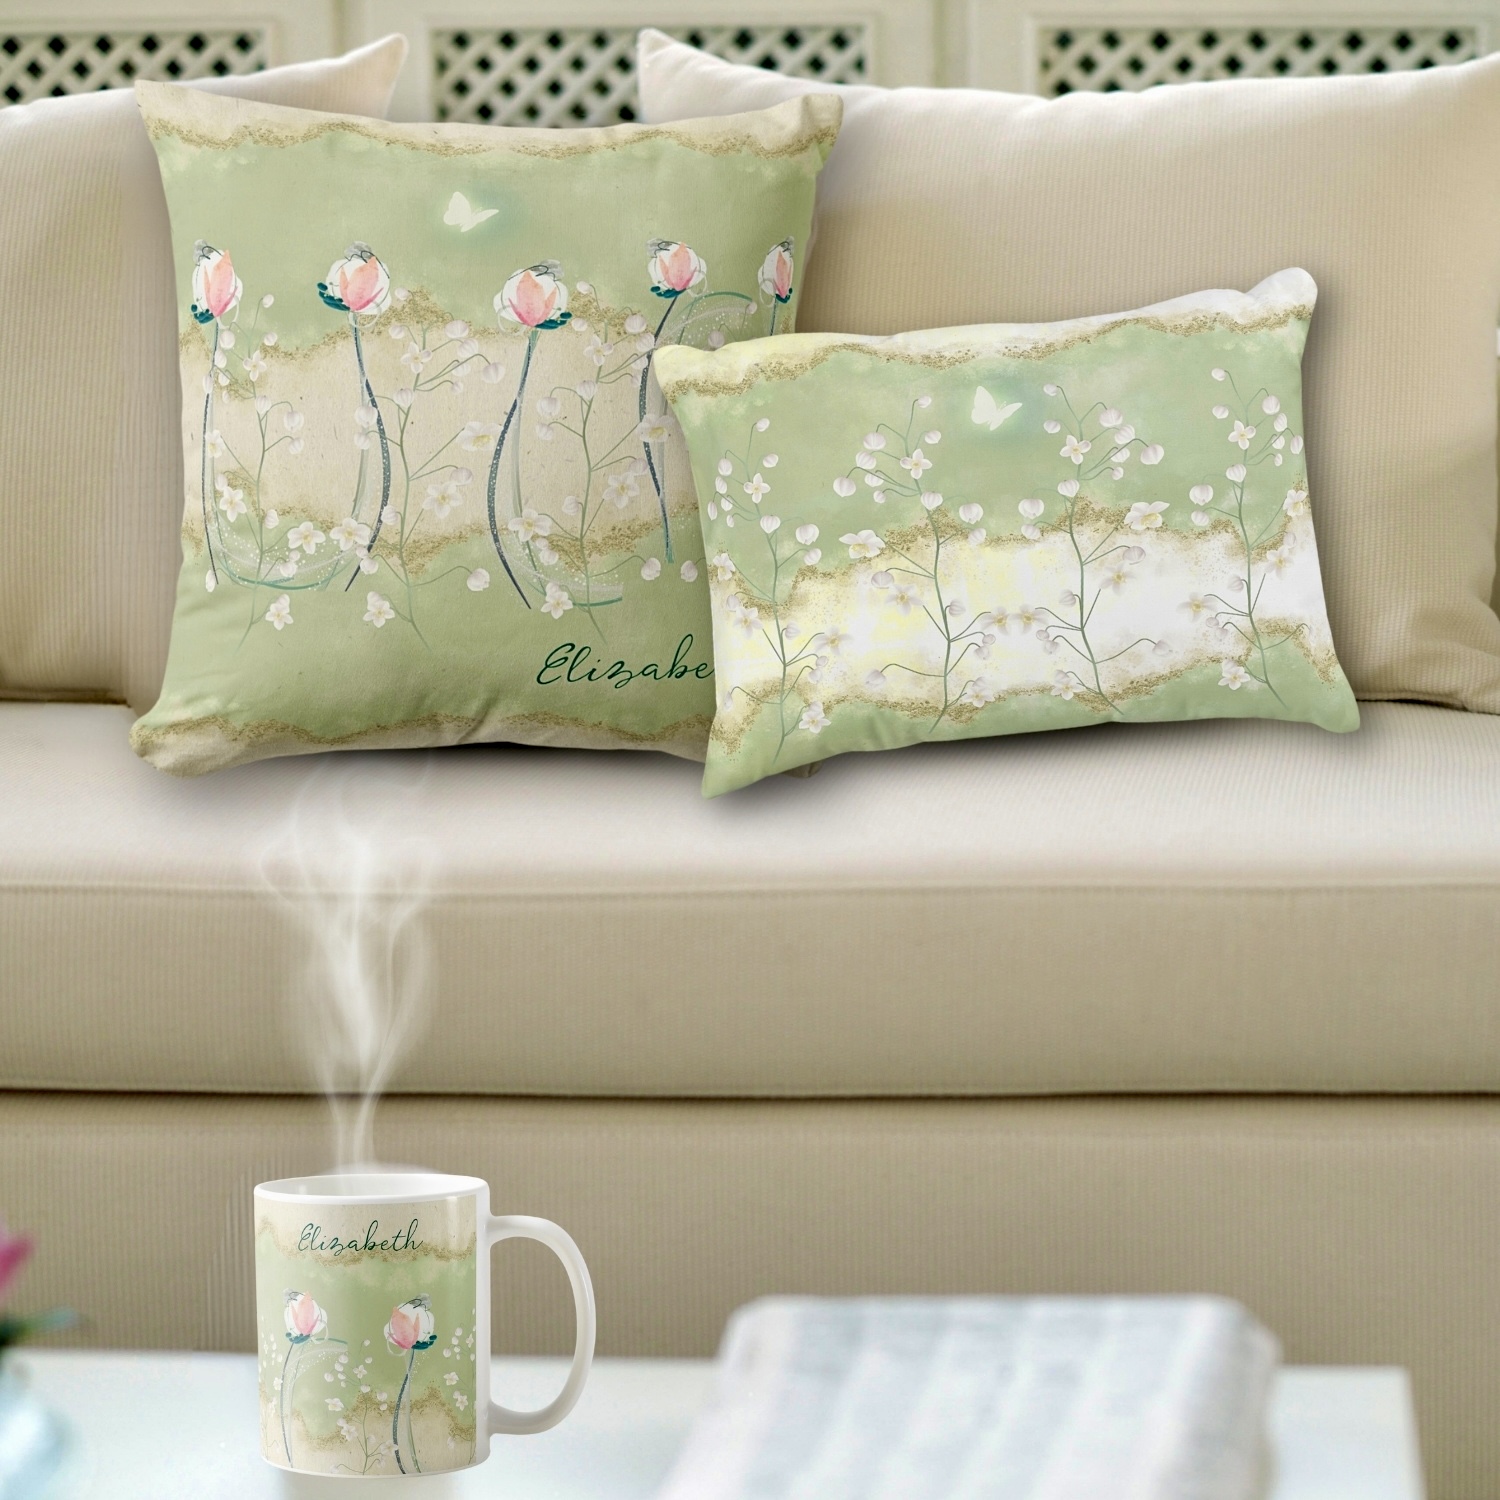 For a she shed with throw pillows and mugs that feature a bohemian design. The throw pillows are adorned with moss green backgrounds and delicate white pastel flowers, while the mugs have matching floral patterns. This combination creates a cohesive boho-inspired look, adding a cozy and personalized touch to the she shed.